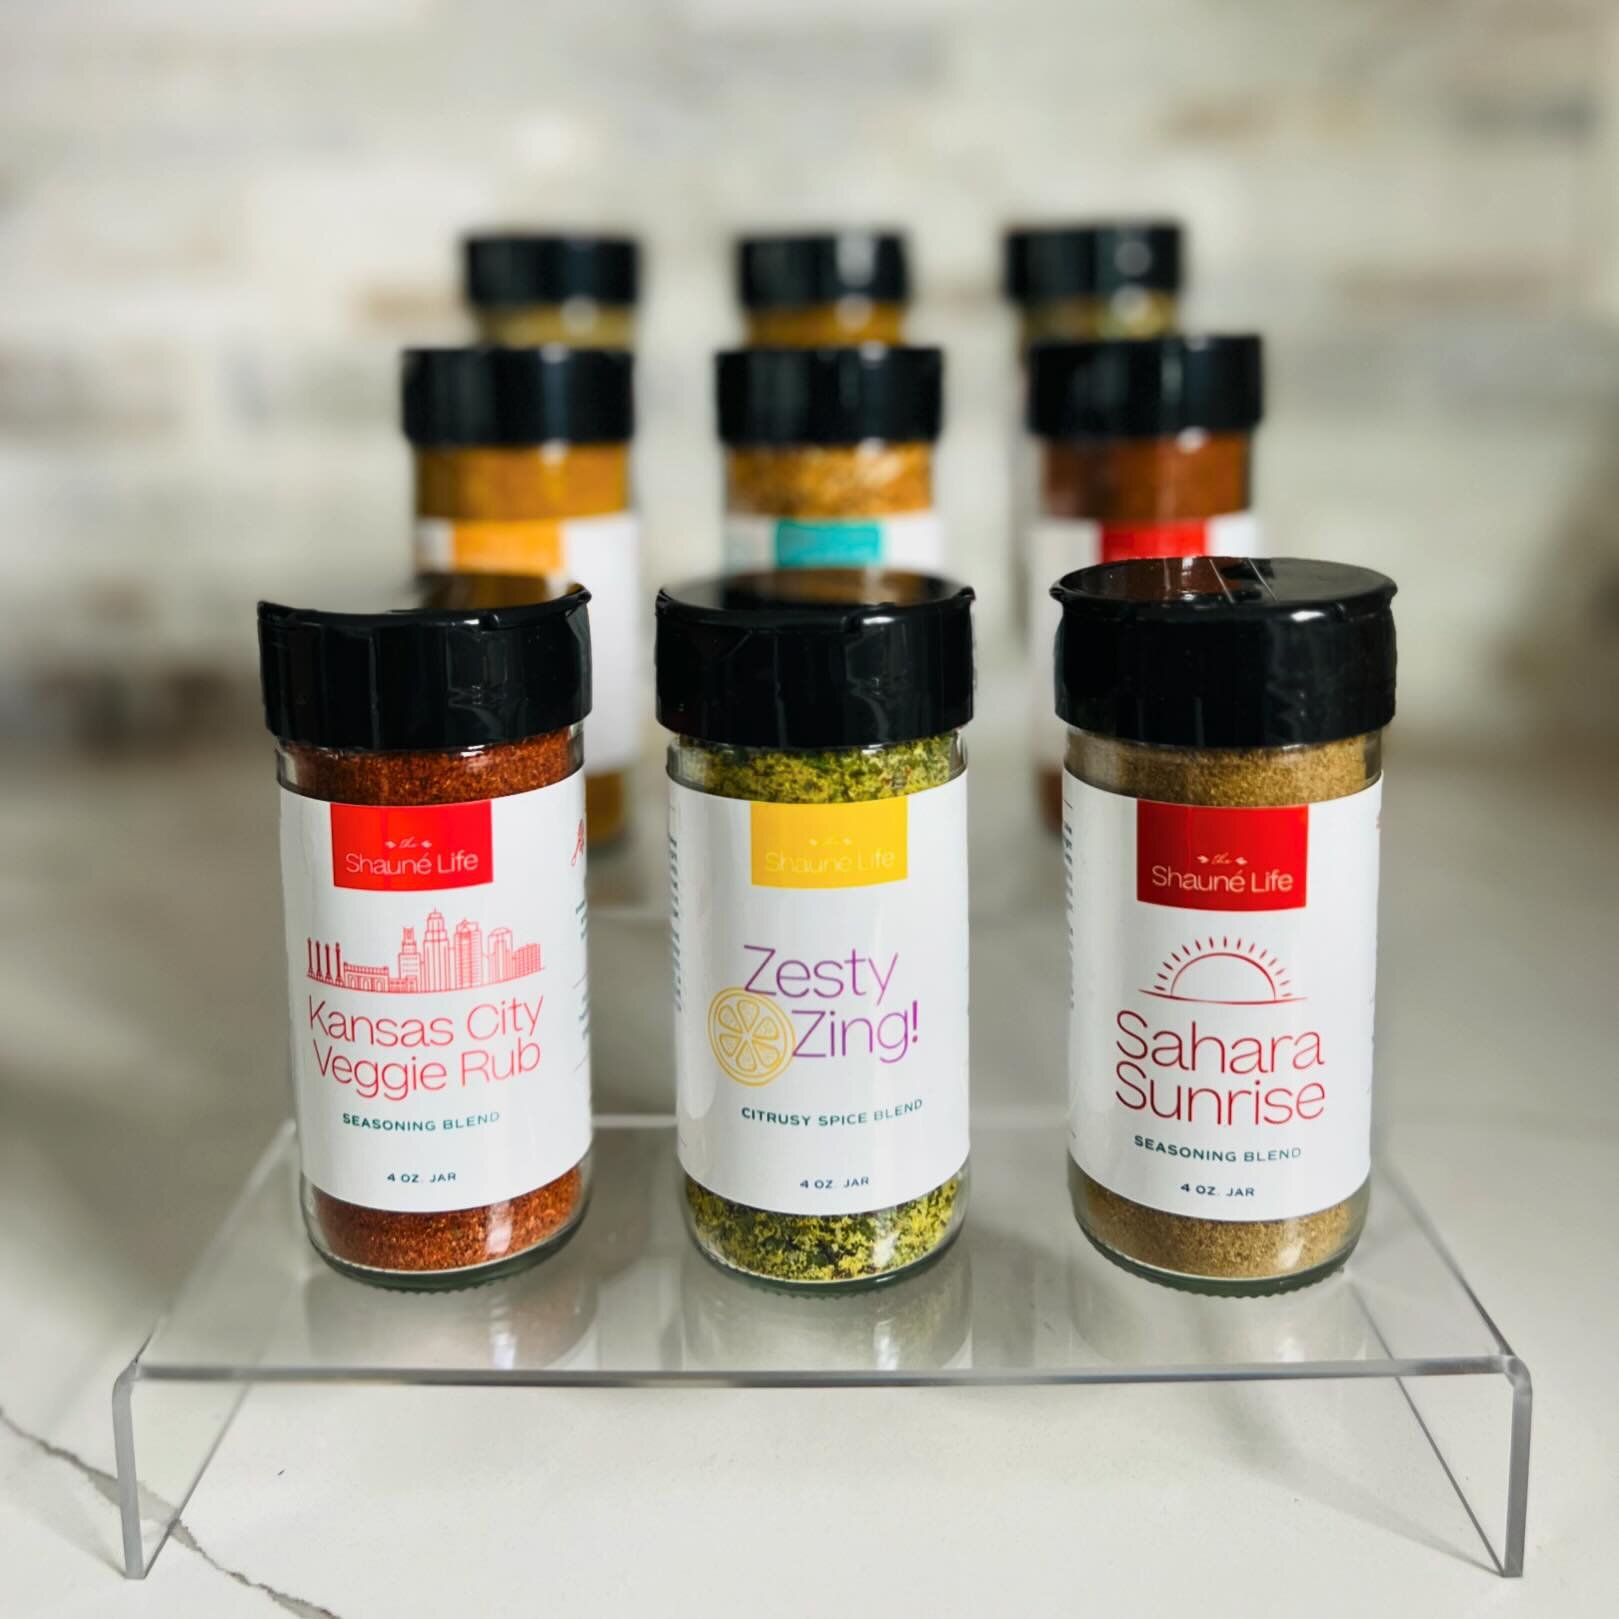 At first, there was one now there are nine! My spices line is growing and two new spices have been added! 

Kansas City Veggie Rub is of course in honor of my hometown ☺️ and brings the taste of classic barbecue to your kitchen. It has a perfect bala